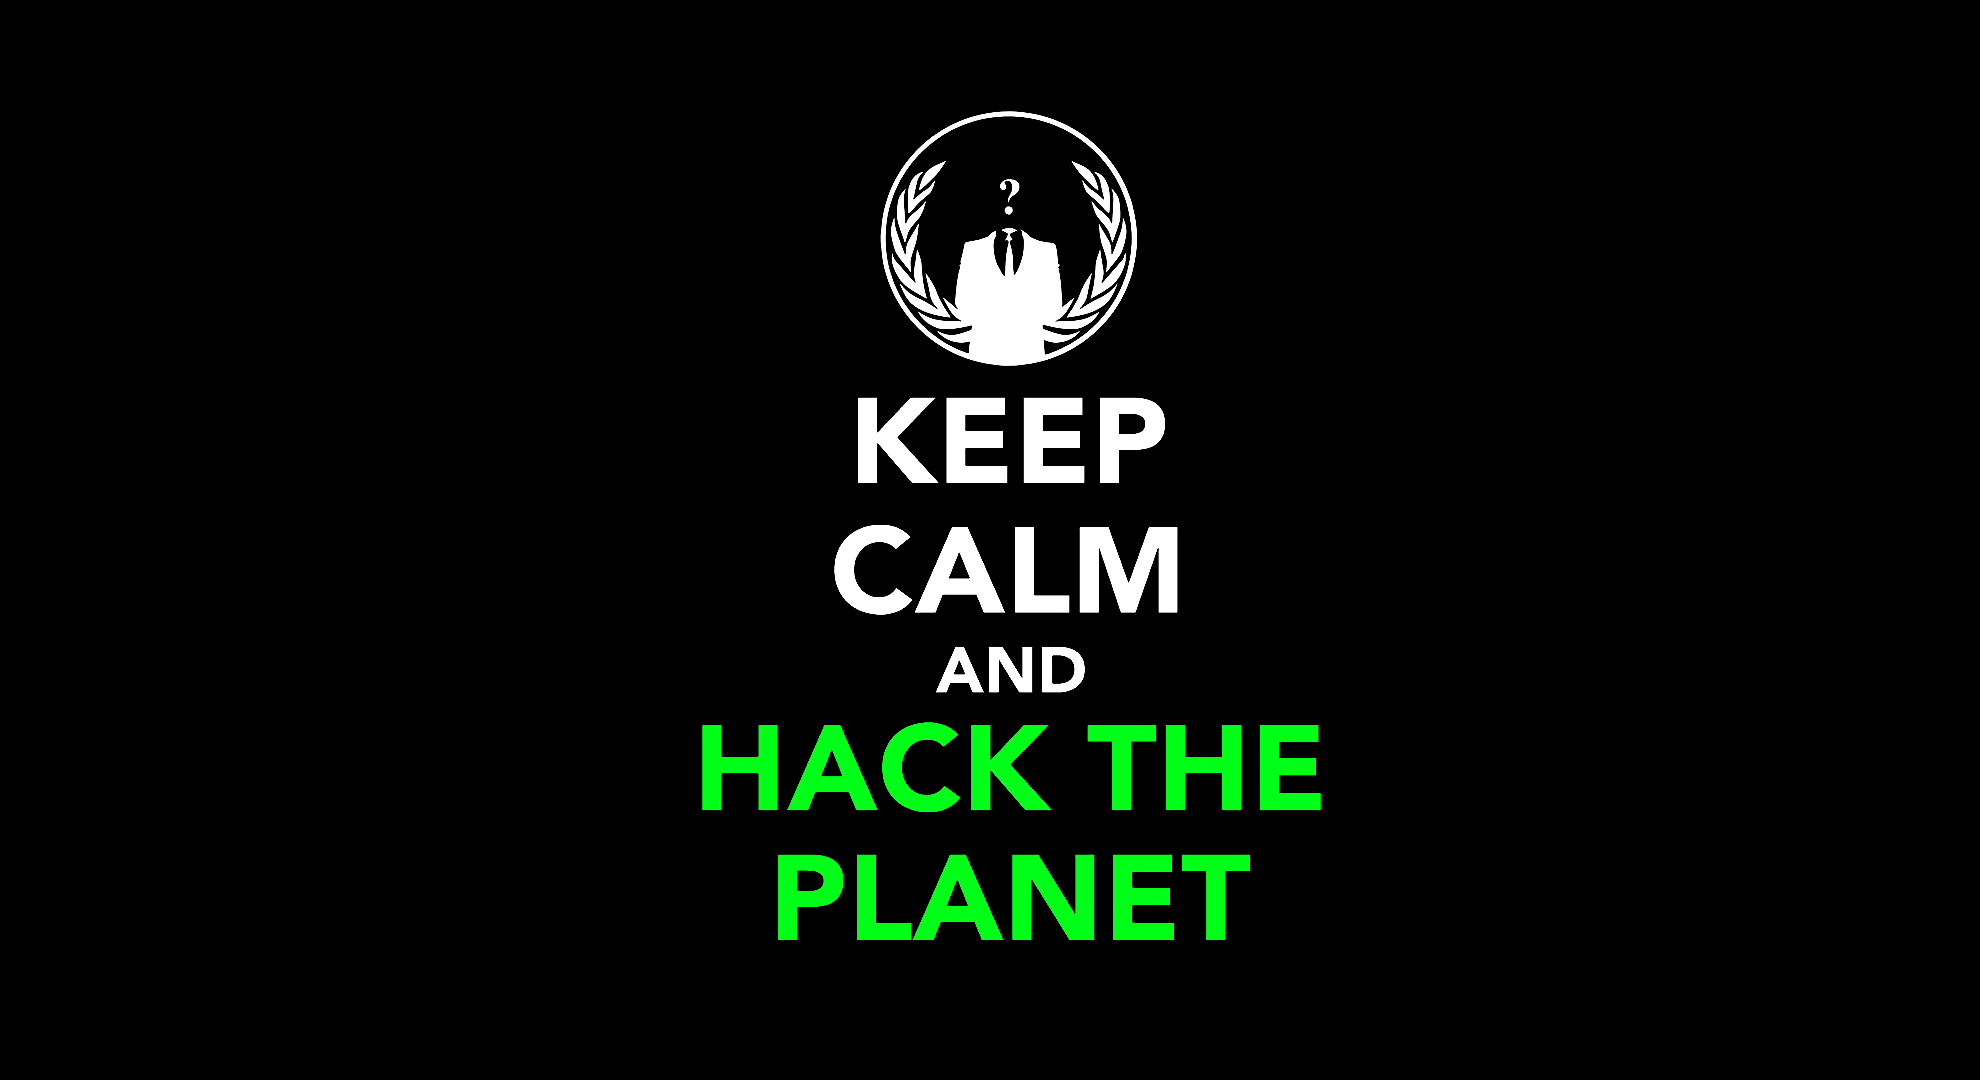 General 1980x1080 Anonymous (hacker group) hacking Keep Calm and... black background simple background typography